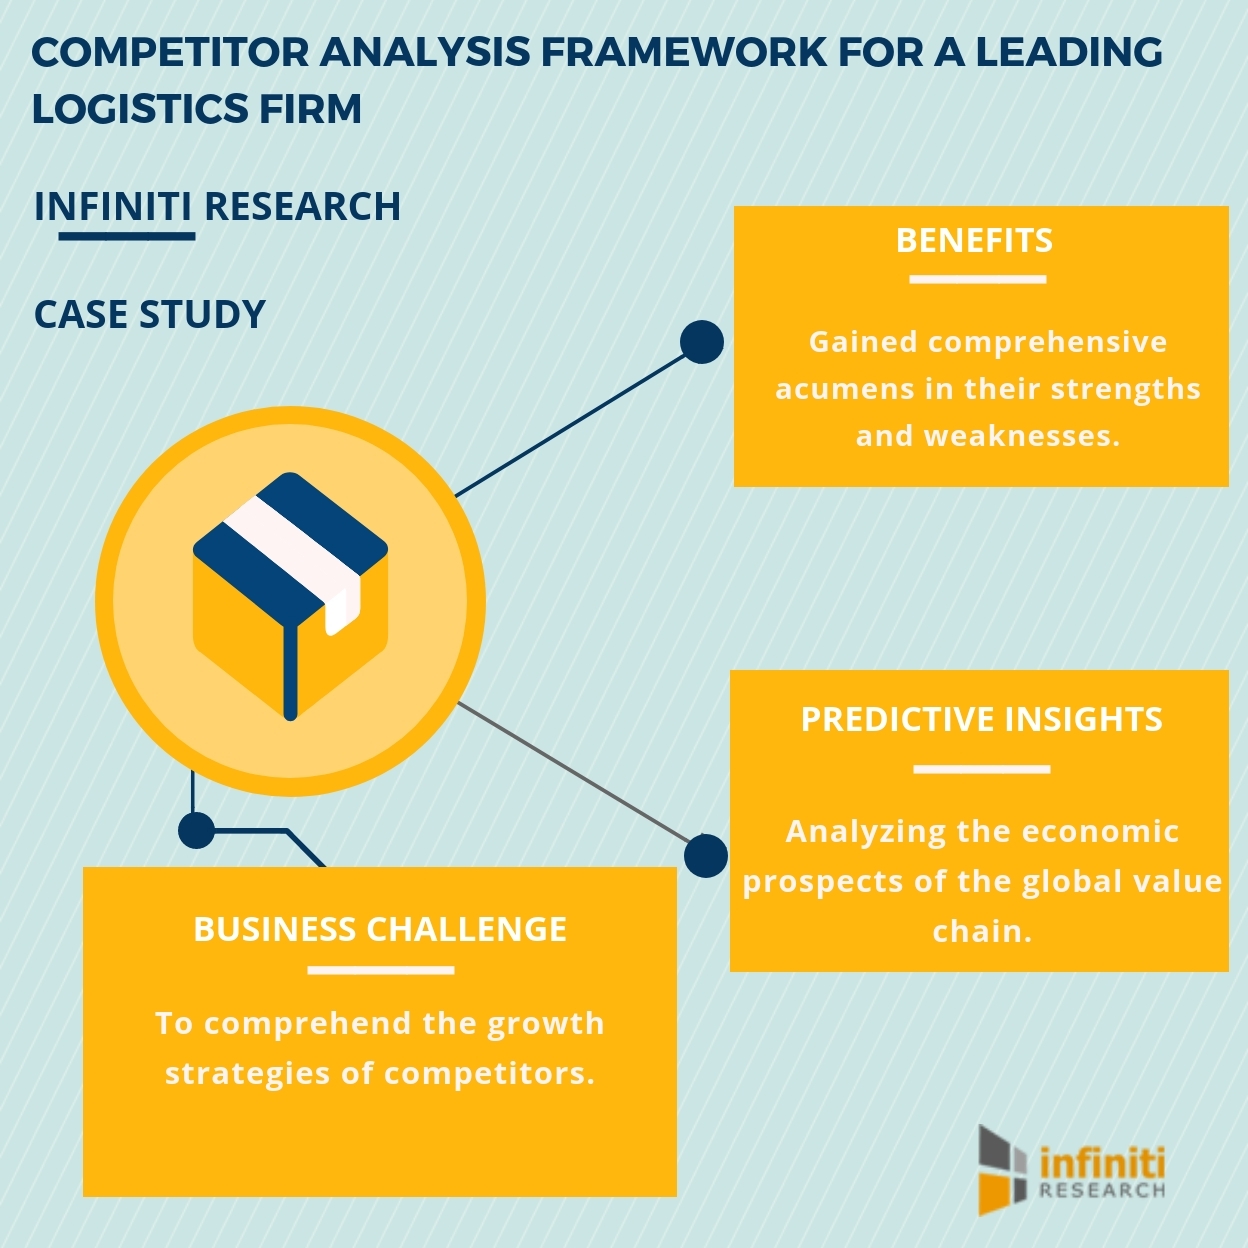 Competitor Analysis Framework Helped A Leading Transport And Logistics Firm To Comprehend Growth Strategies Infiniti Research Business Wire